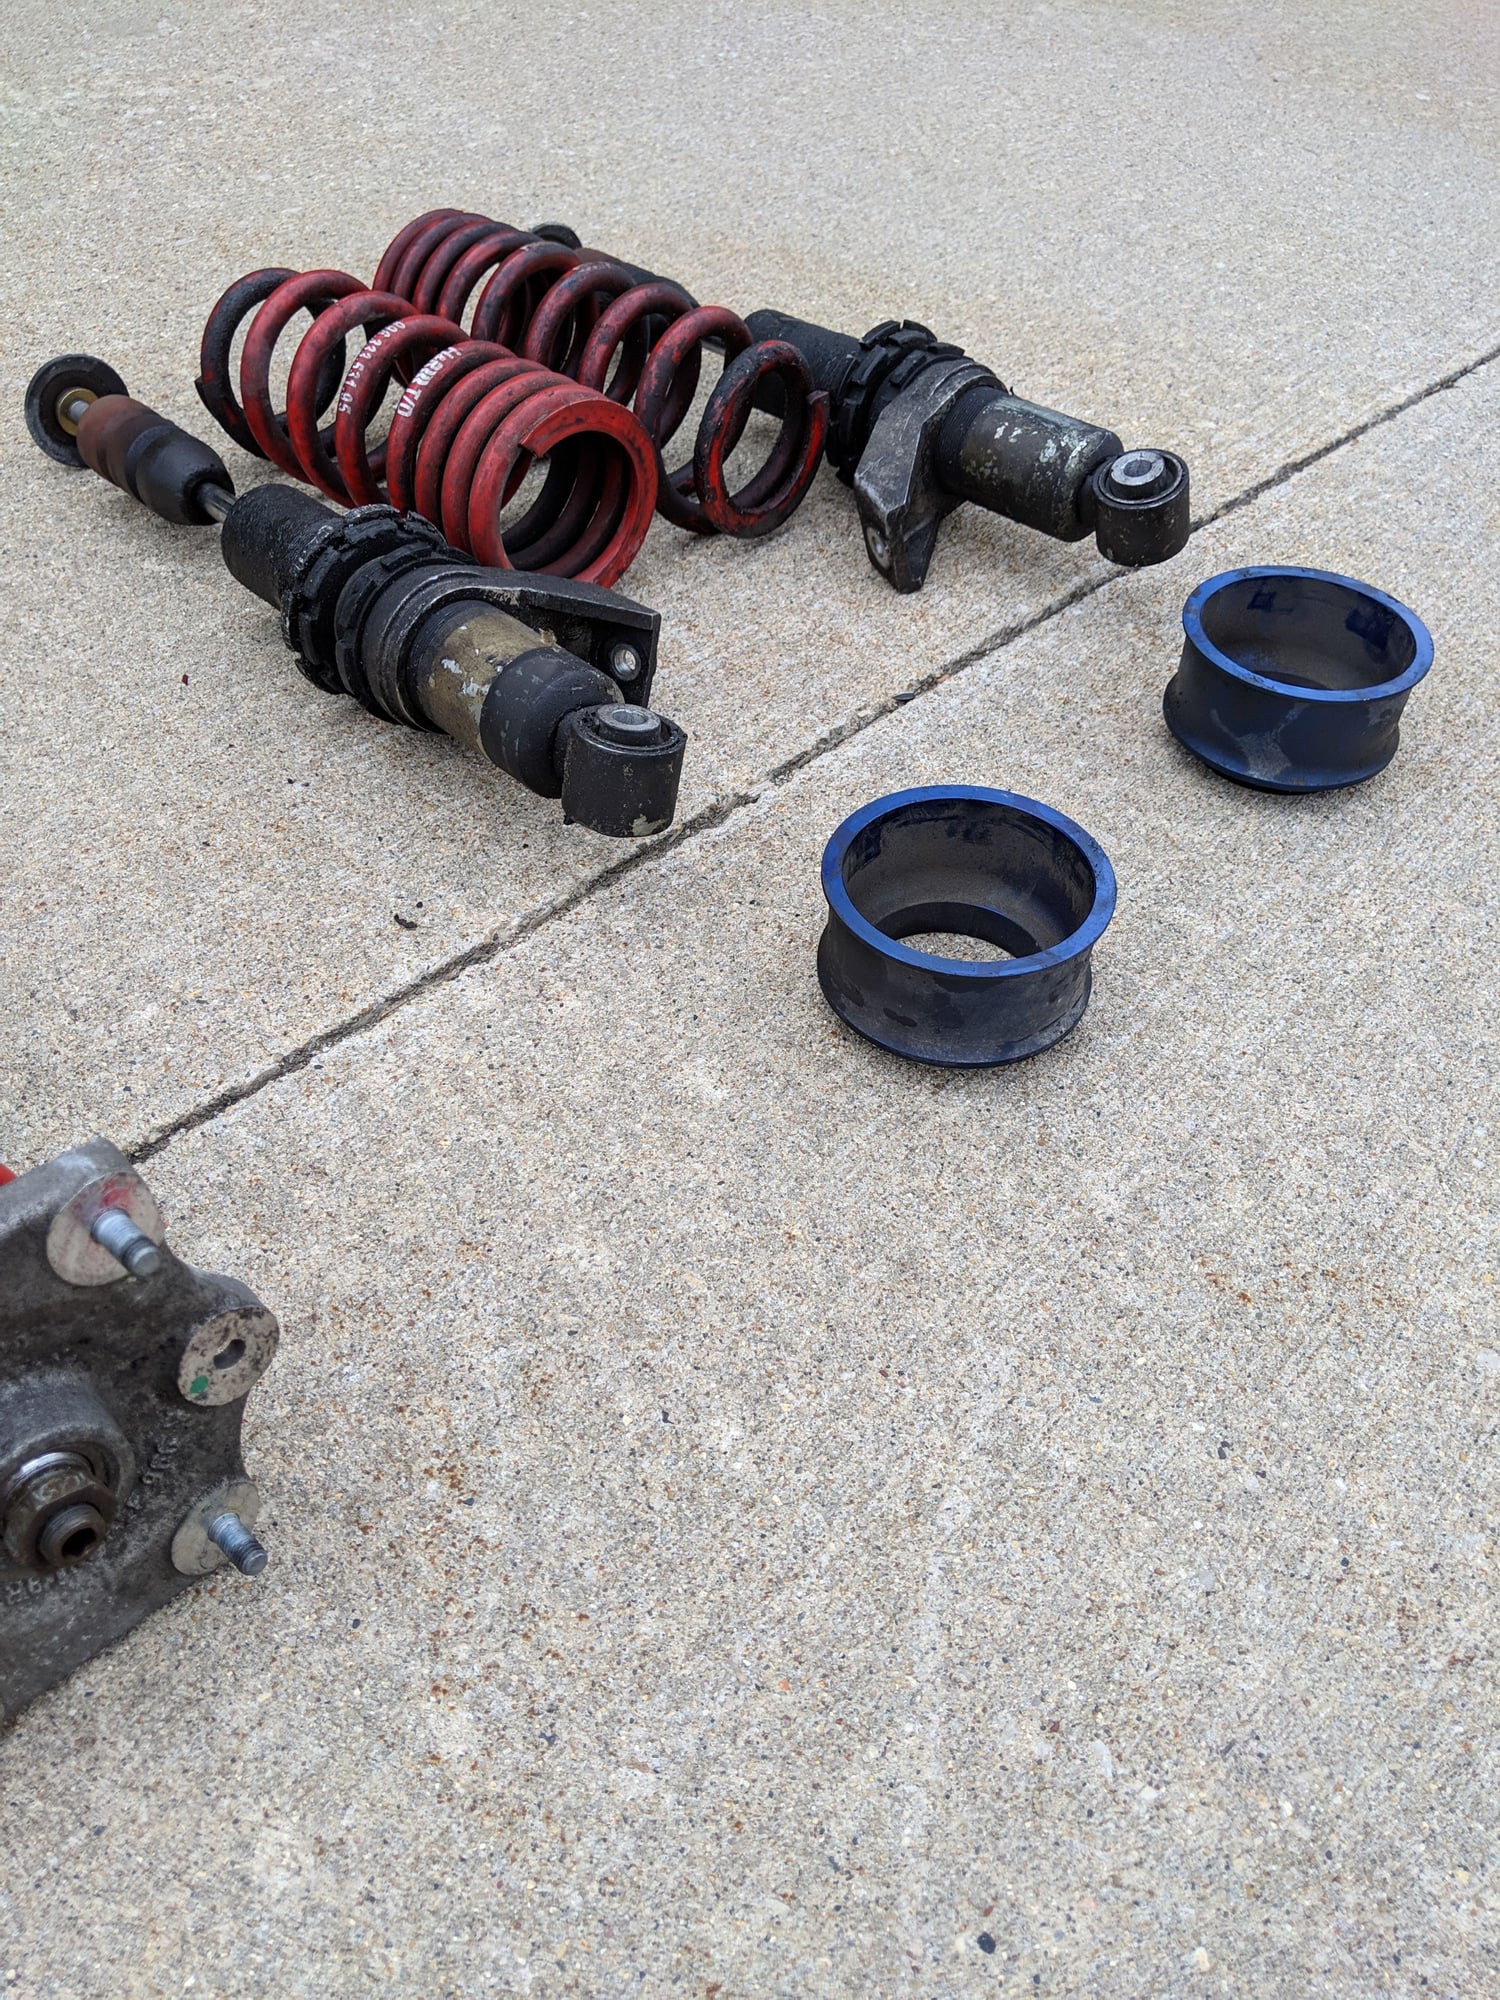 Steering/Suspension - FS: OEM 996 GT3 Coilovers Including Front Hats - Used - 1999 to 2005 Porsche 911 - Waukesha, WI 53188, United States